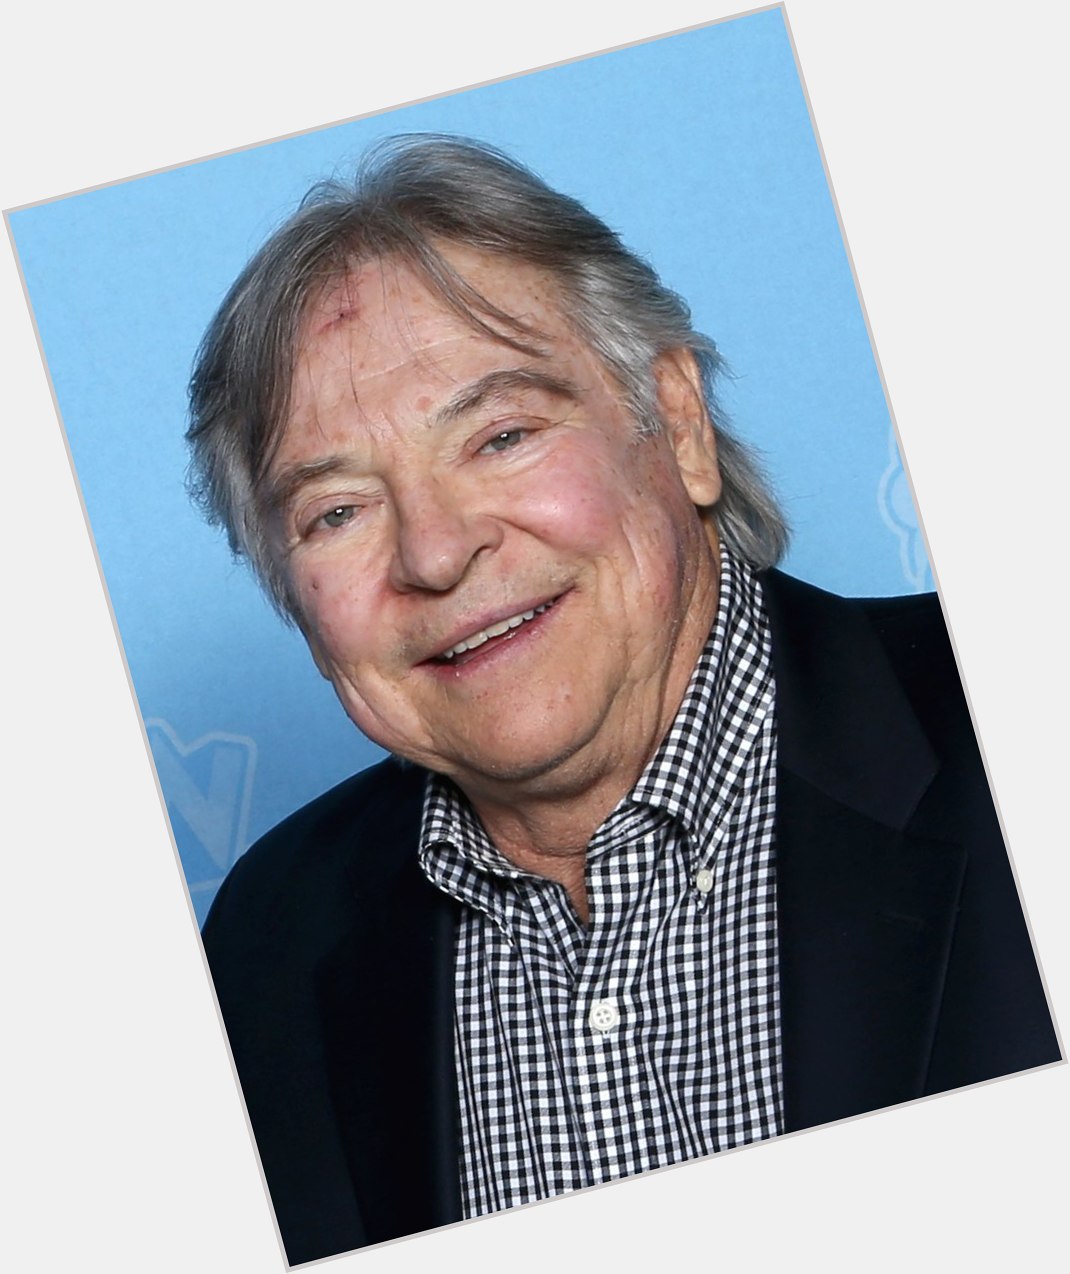 Happy birthday to the King of Voice Acting himself, Frank Welker! 